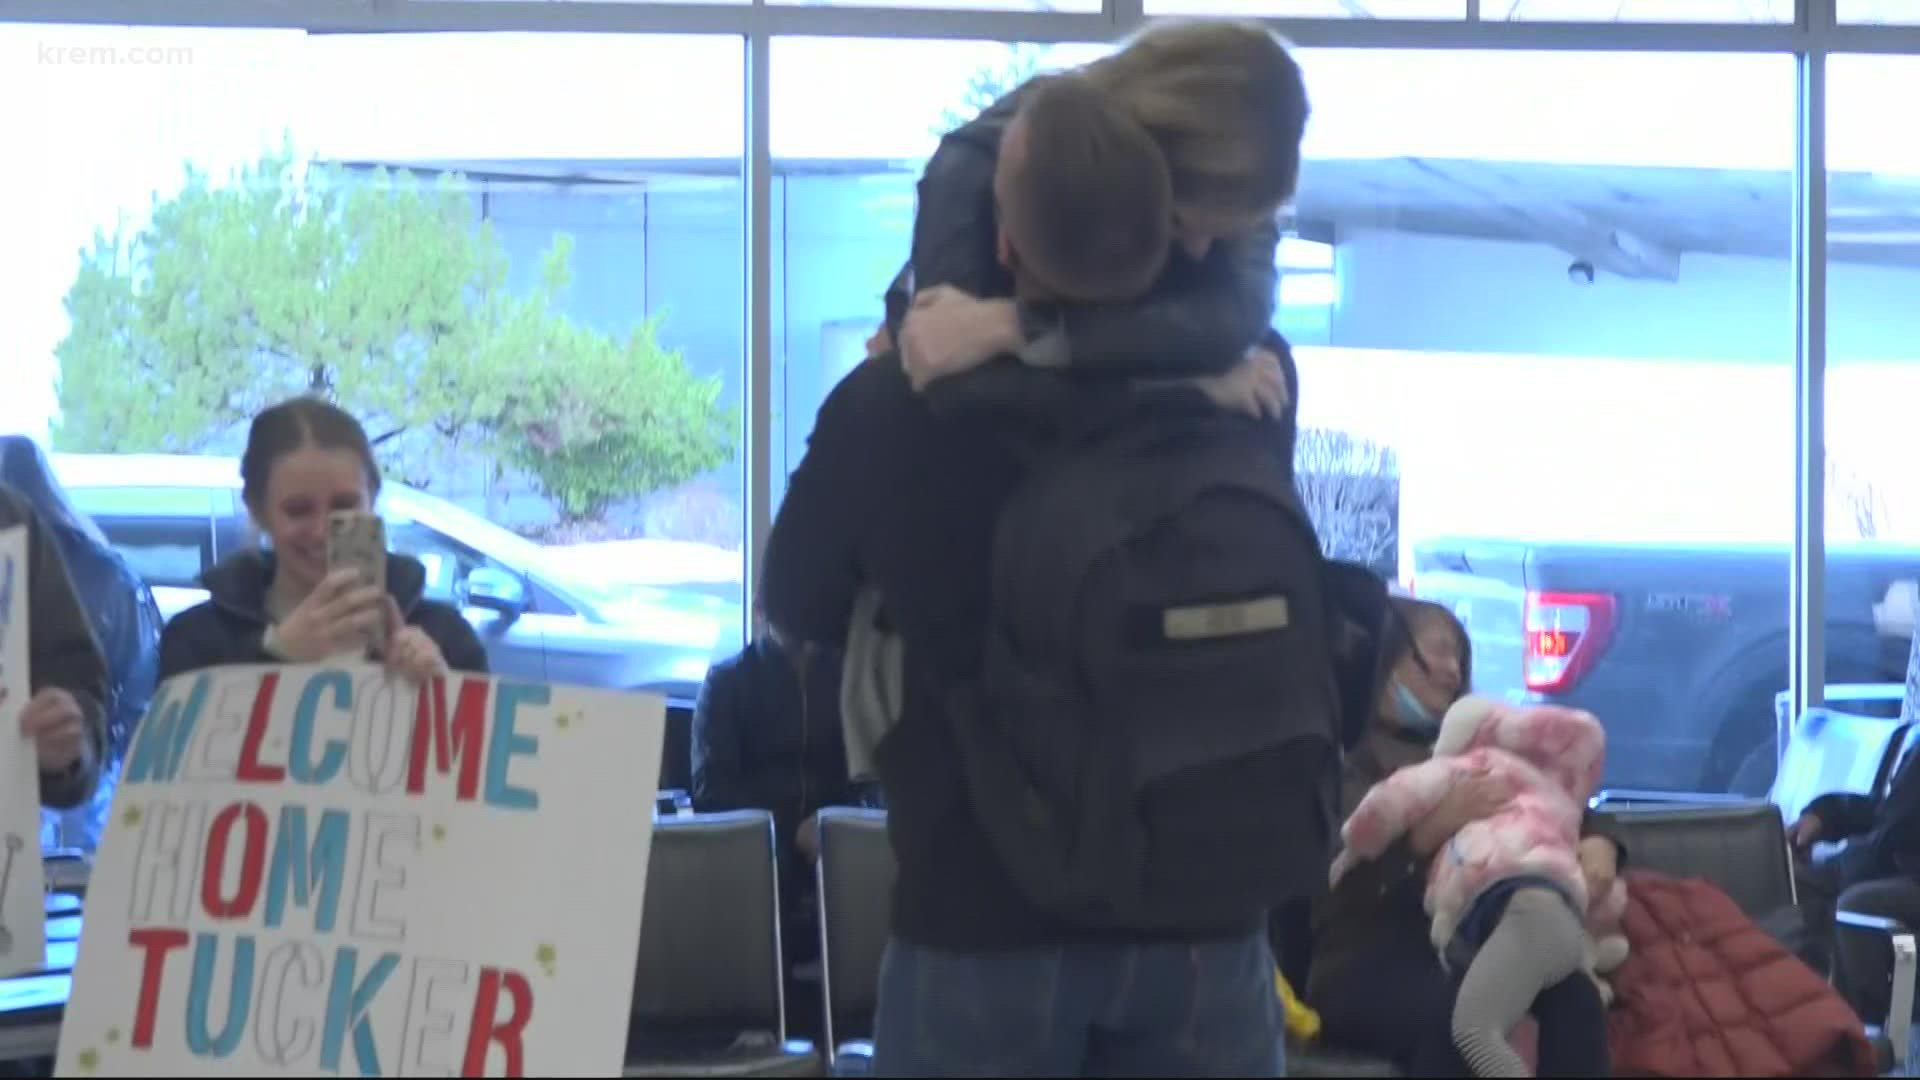 Spokane airport was full of smiles and hugs Thursday morning as families reunited with their loved ones for Christmas Eve holidays.